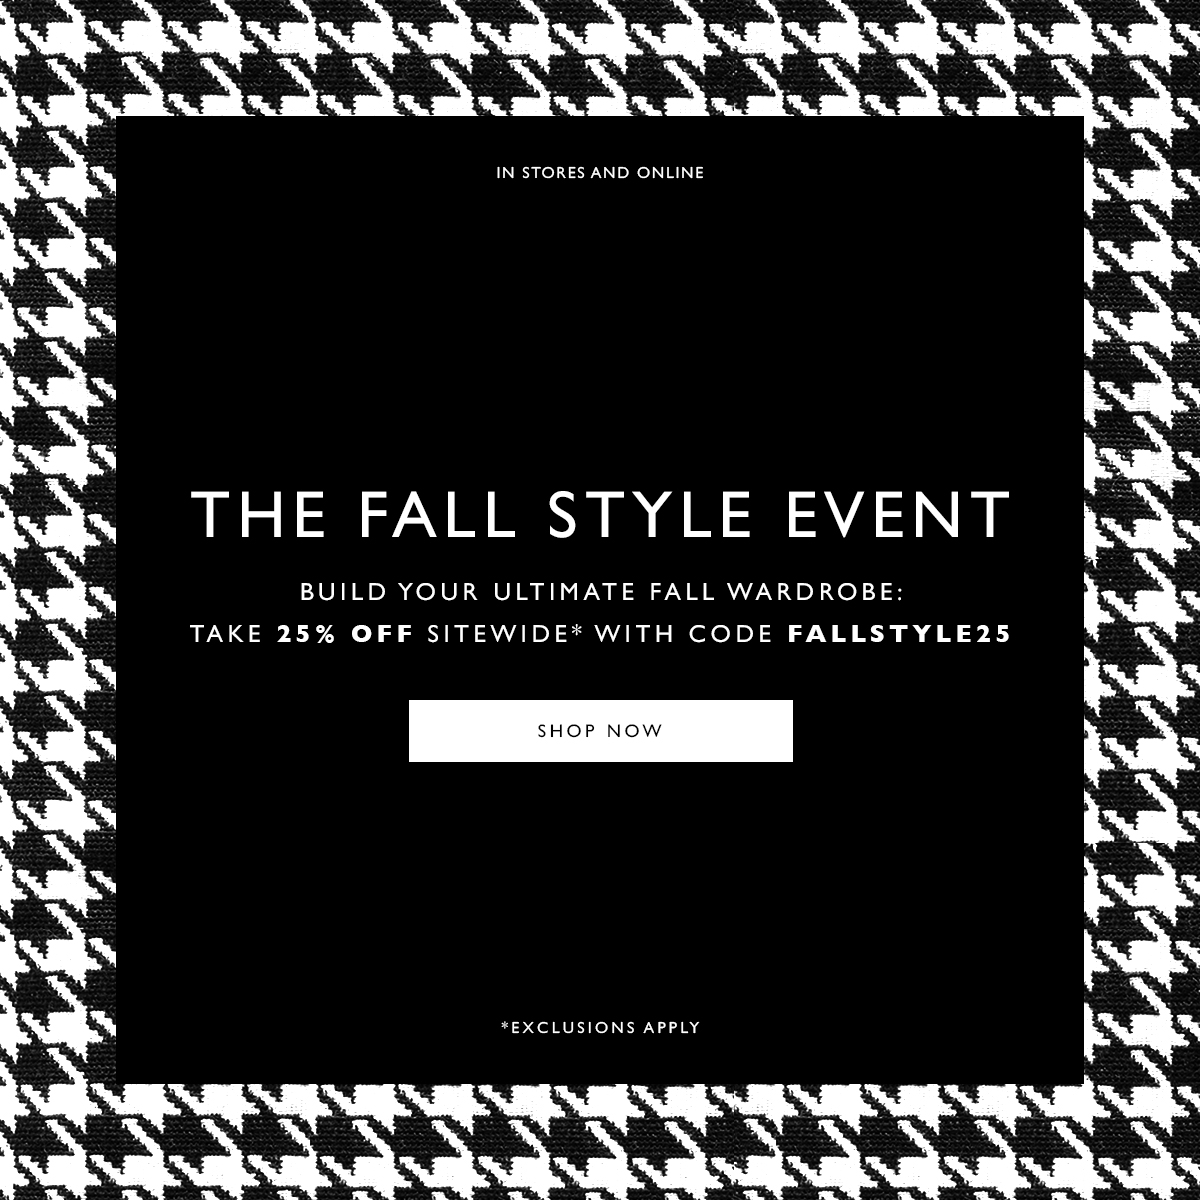 The Fall Style Event. Build your ultimate fall wardrobe: Take 25% off sitewide* with code FALLSTYLE25  CTA: SHOP NOW. *Exclusions apply